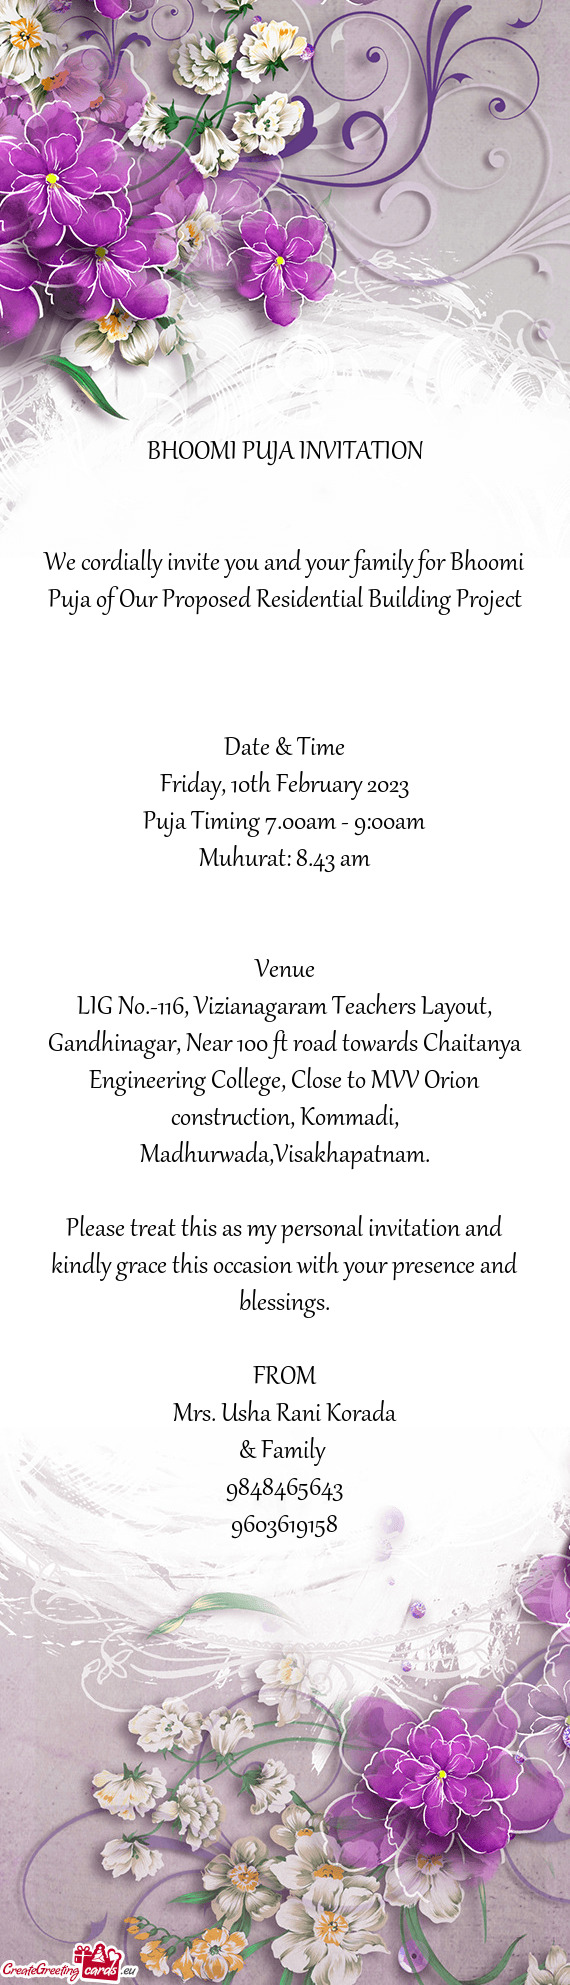 Puja Timing 7.00am - 9:00am